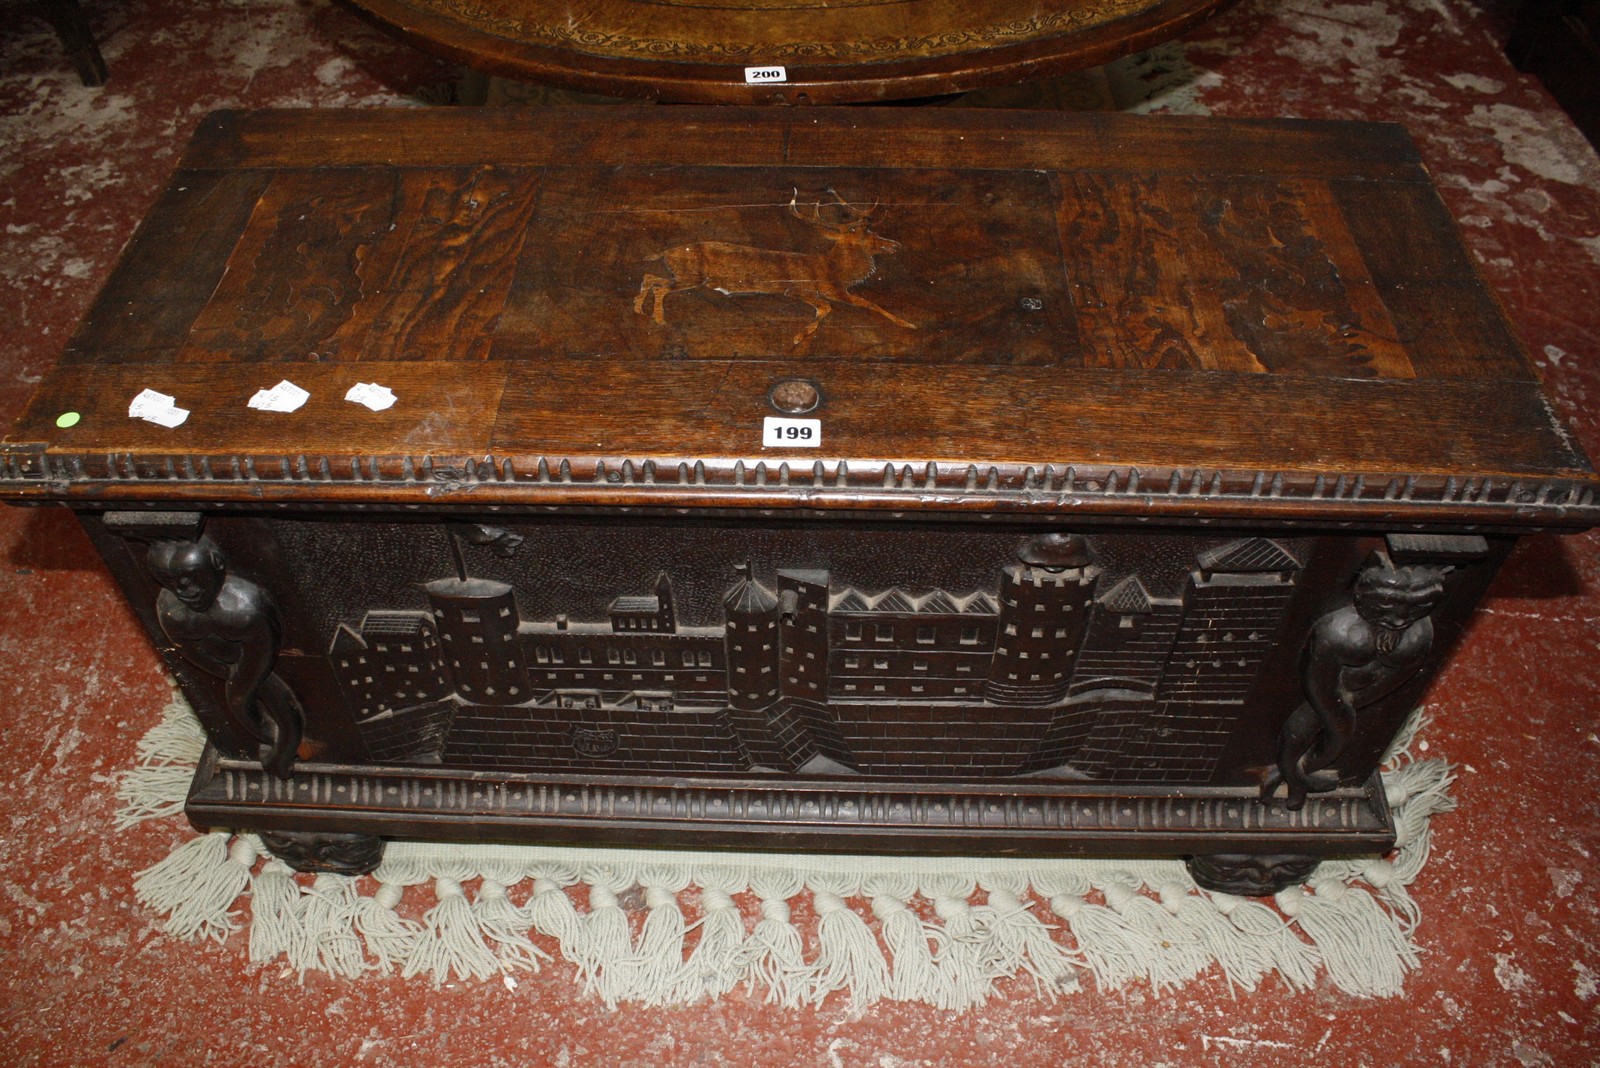 A Continental 19th Century blanket box, the top inlaid with a stag and the front with carved